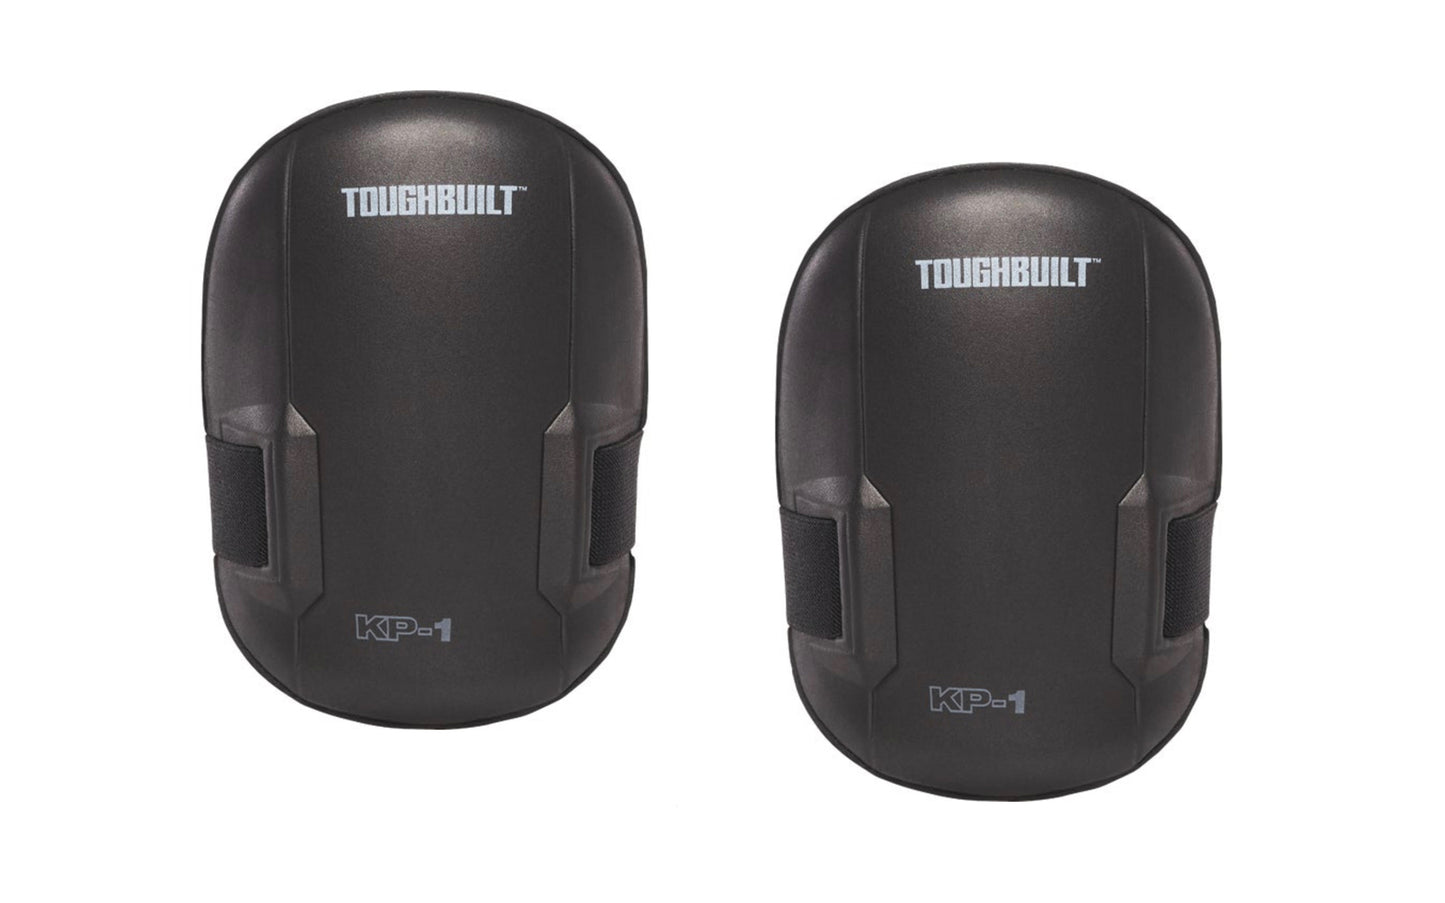 ToughBuilt Ultra Light Knee Pads are molded pads are made with soft, durable, non-marring foam keeping more delicate surfaces scratch free while resisting wear on rougher terrain. Comfortable single elastic strap hugs the calf, and avoids bunching behind the knee for all-day comfort. Great for delicate surfaces, hard wood, marble & tile.